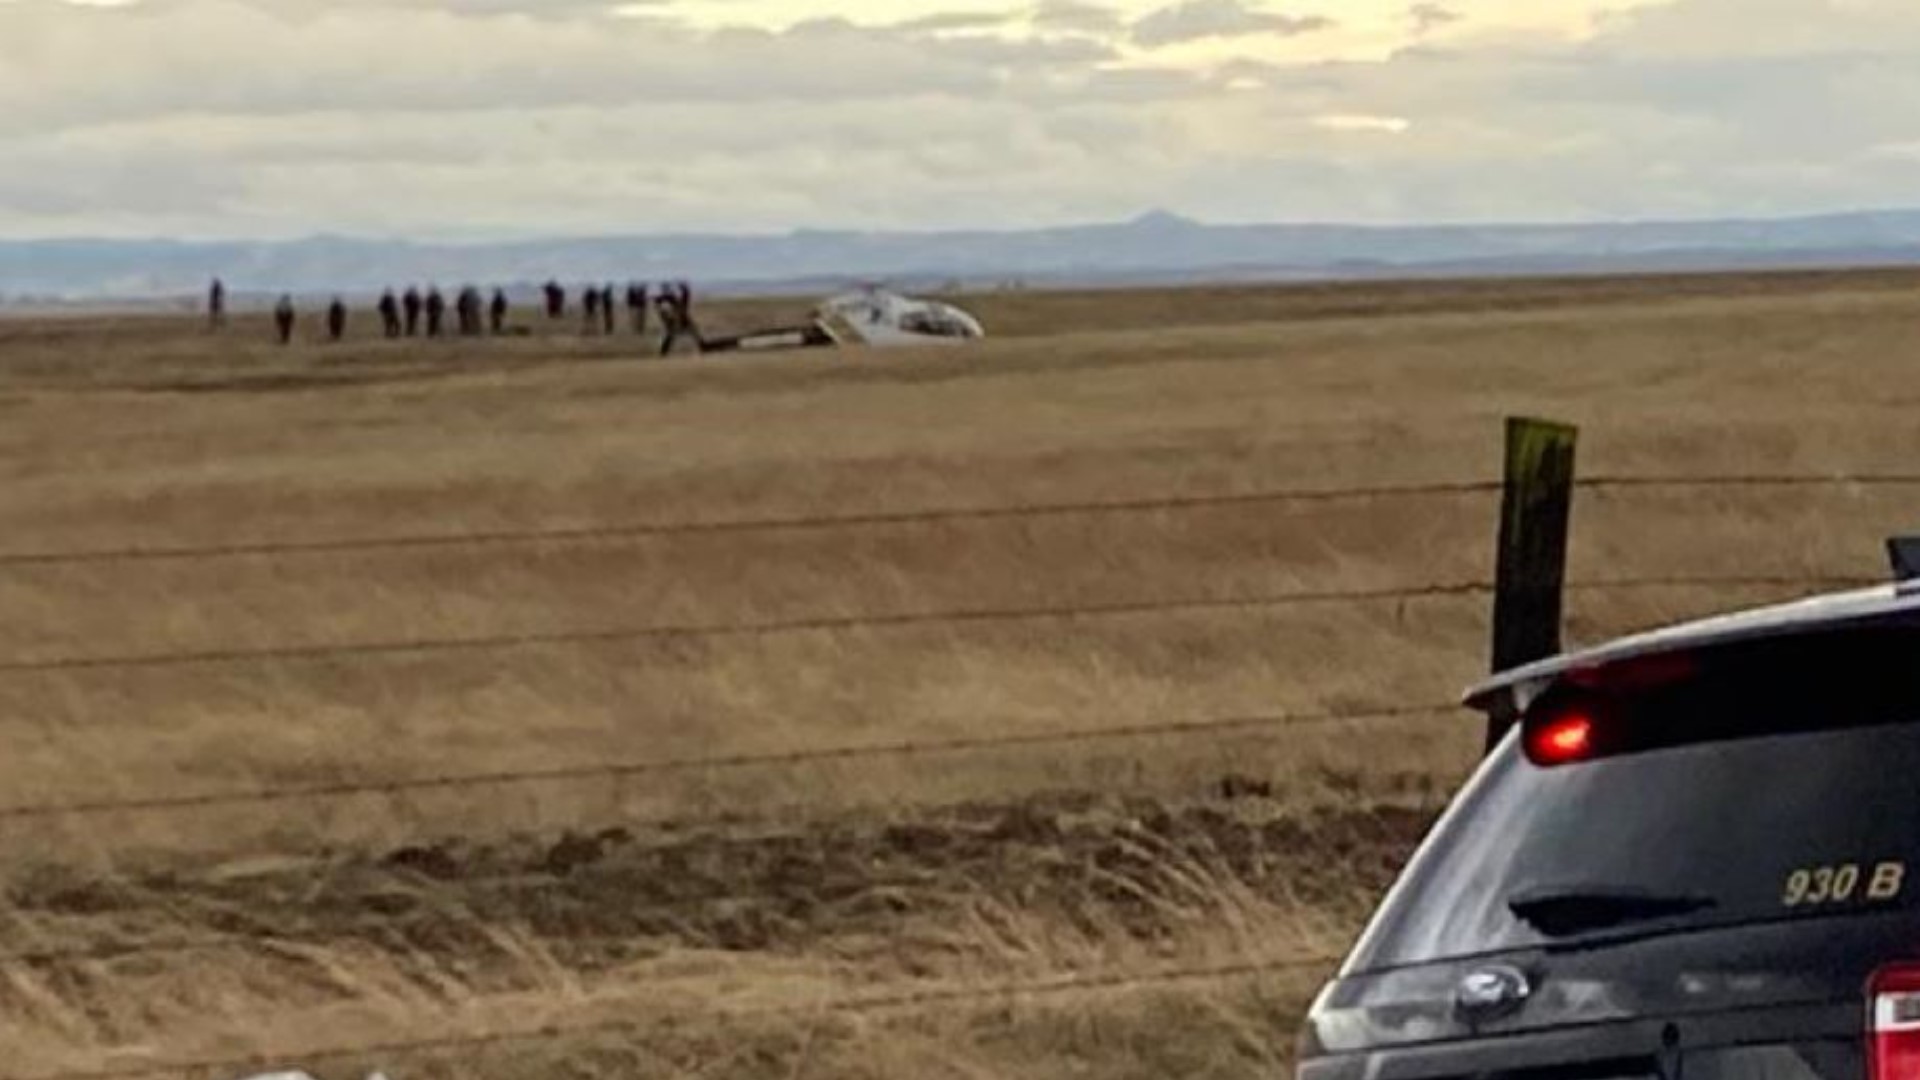 Two deputies were on board when the helicopter made the emergency landing but no injuries have been reported, according to the Sacramento Metro Fire District.